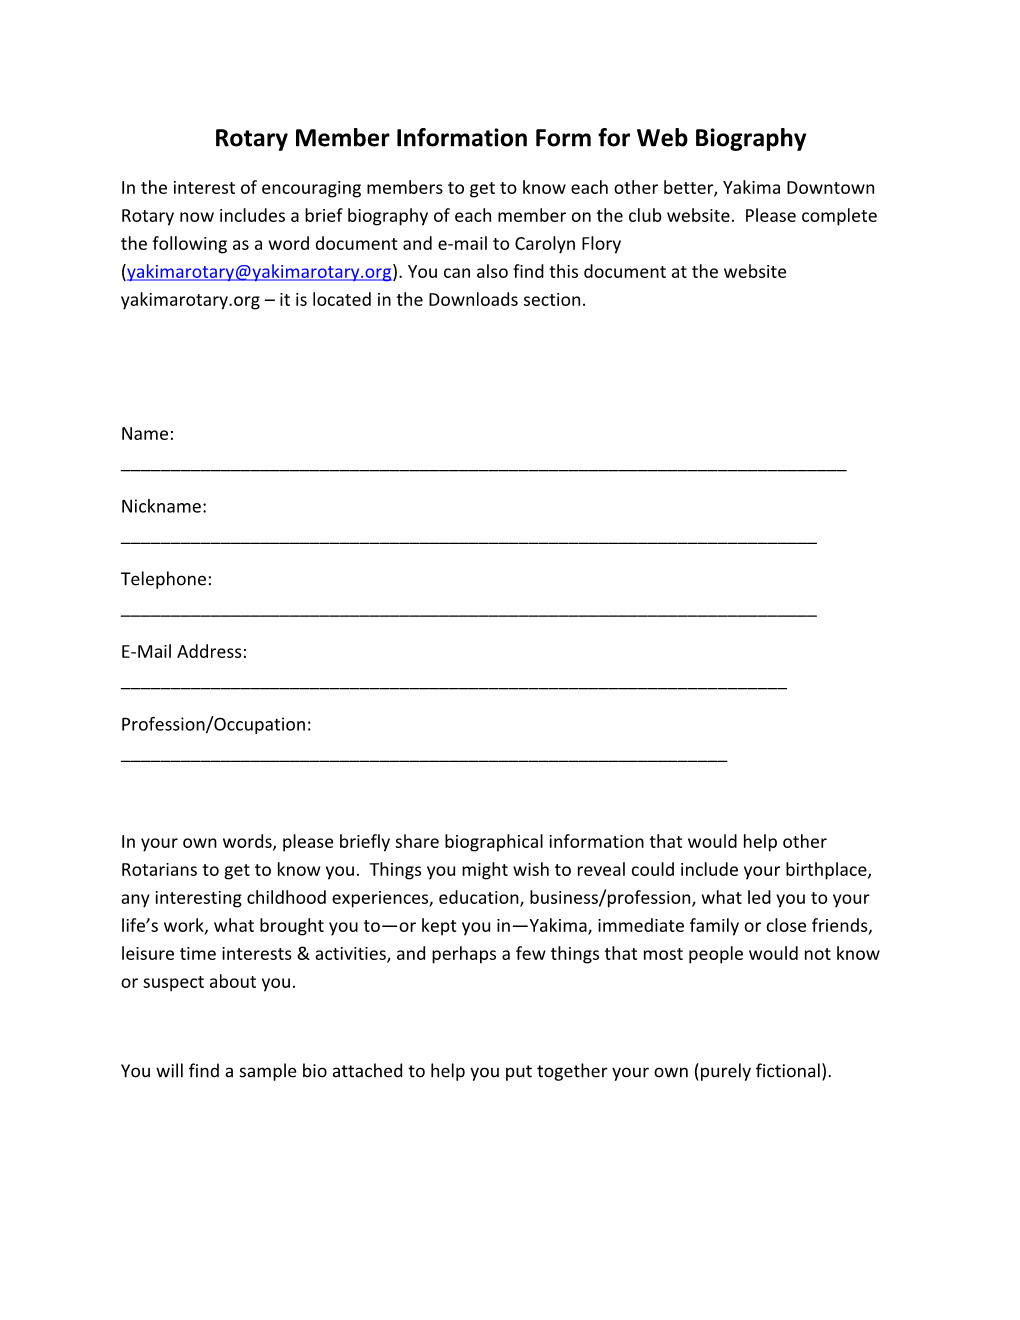 Rotary Member Information Form for Web Biography